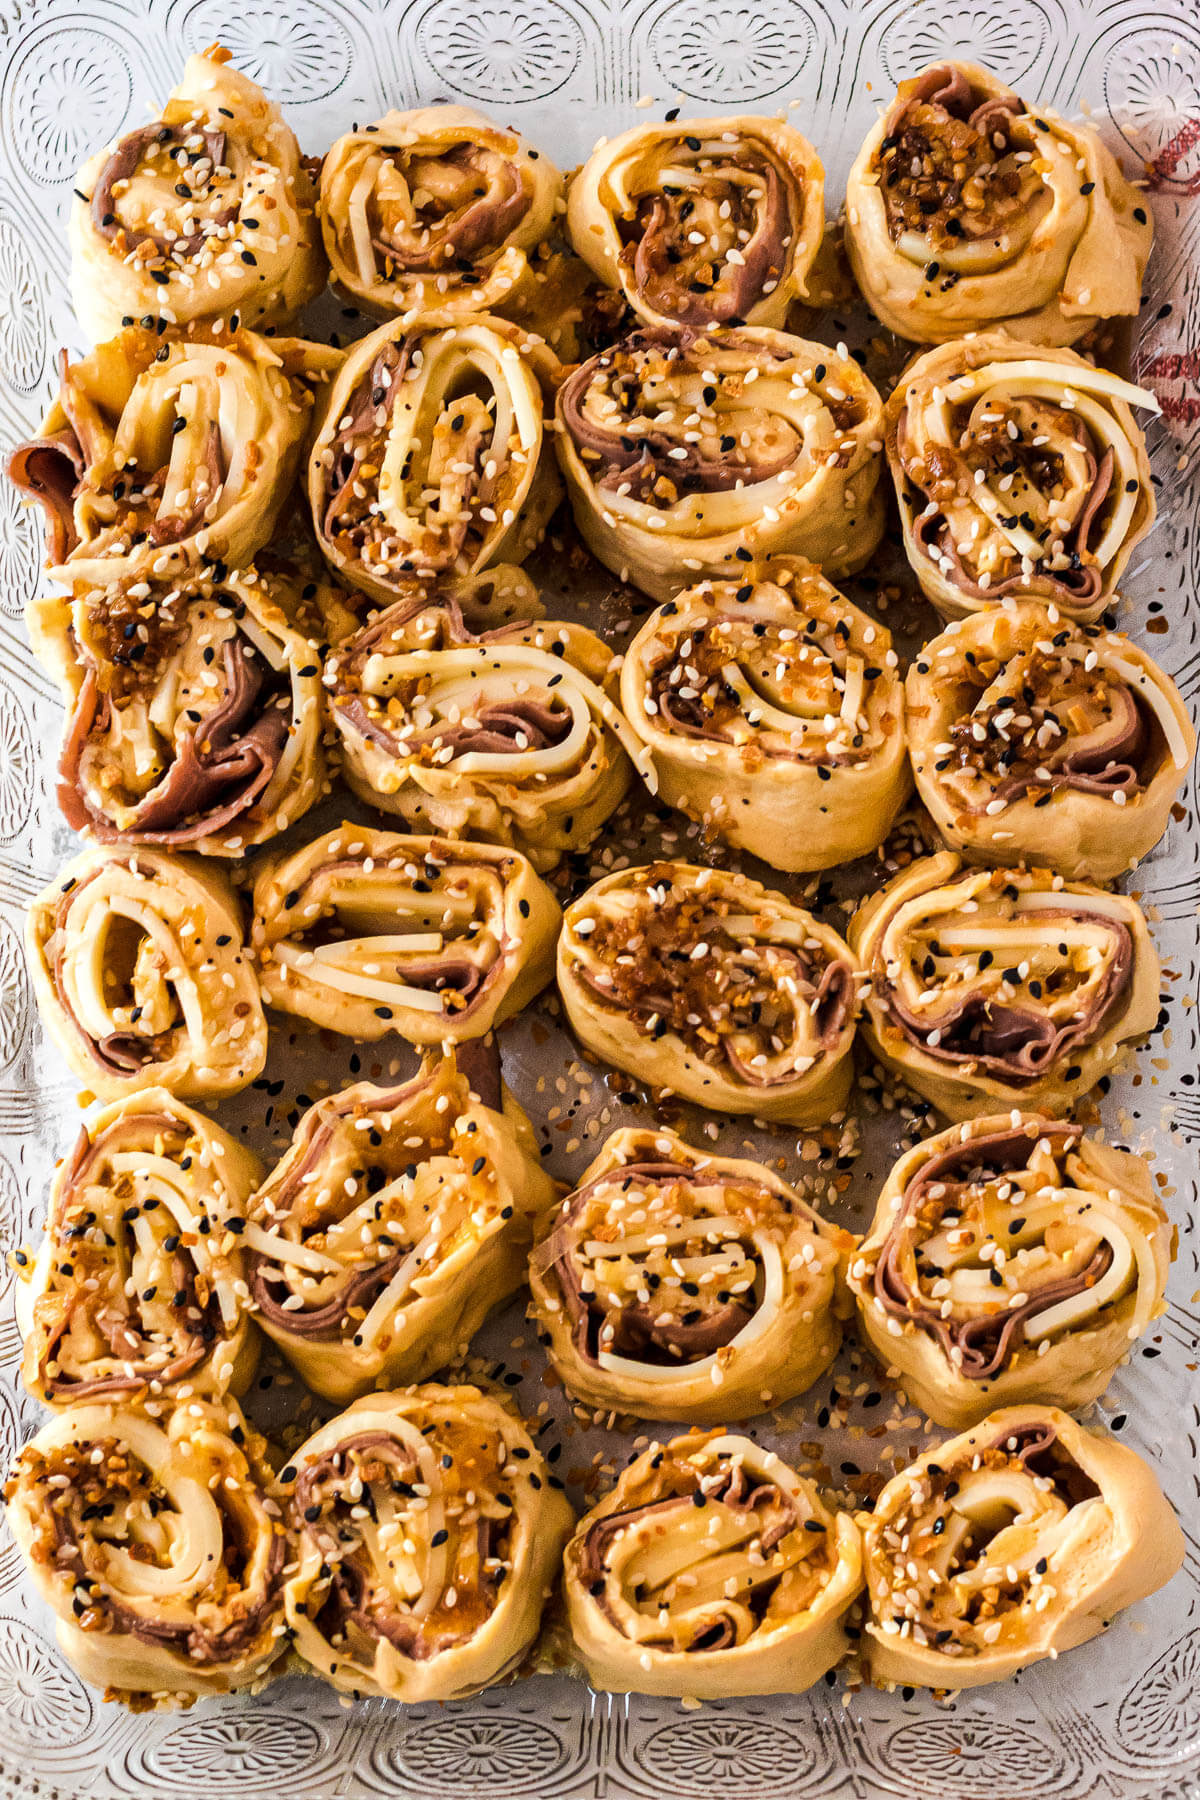 Beef pinwheels arranged in a glass baking dish before they are baked.